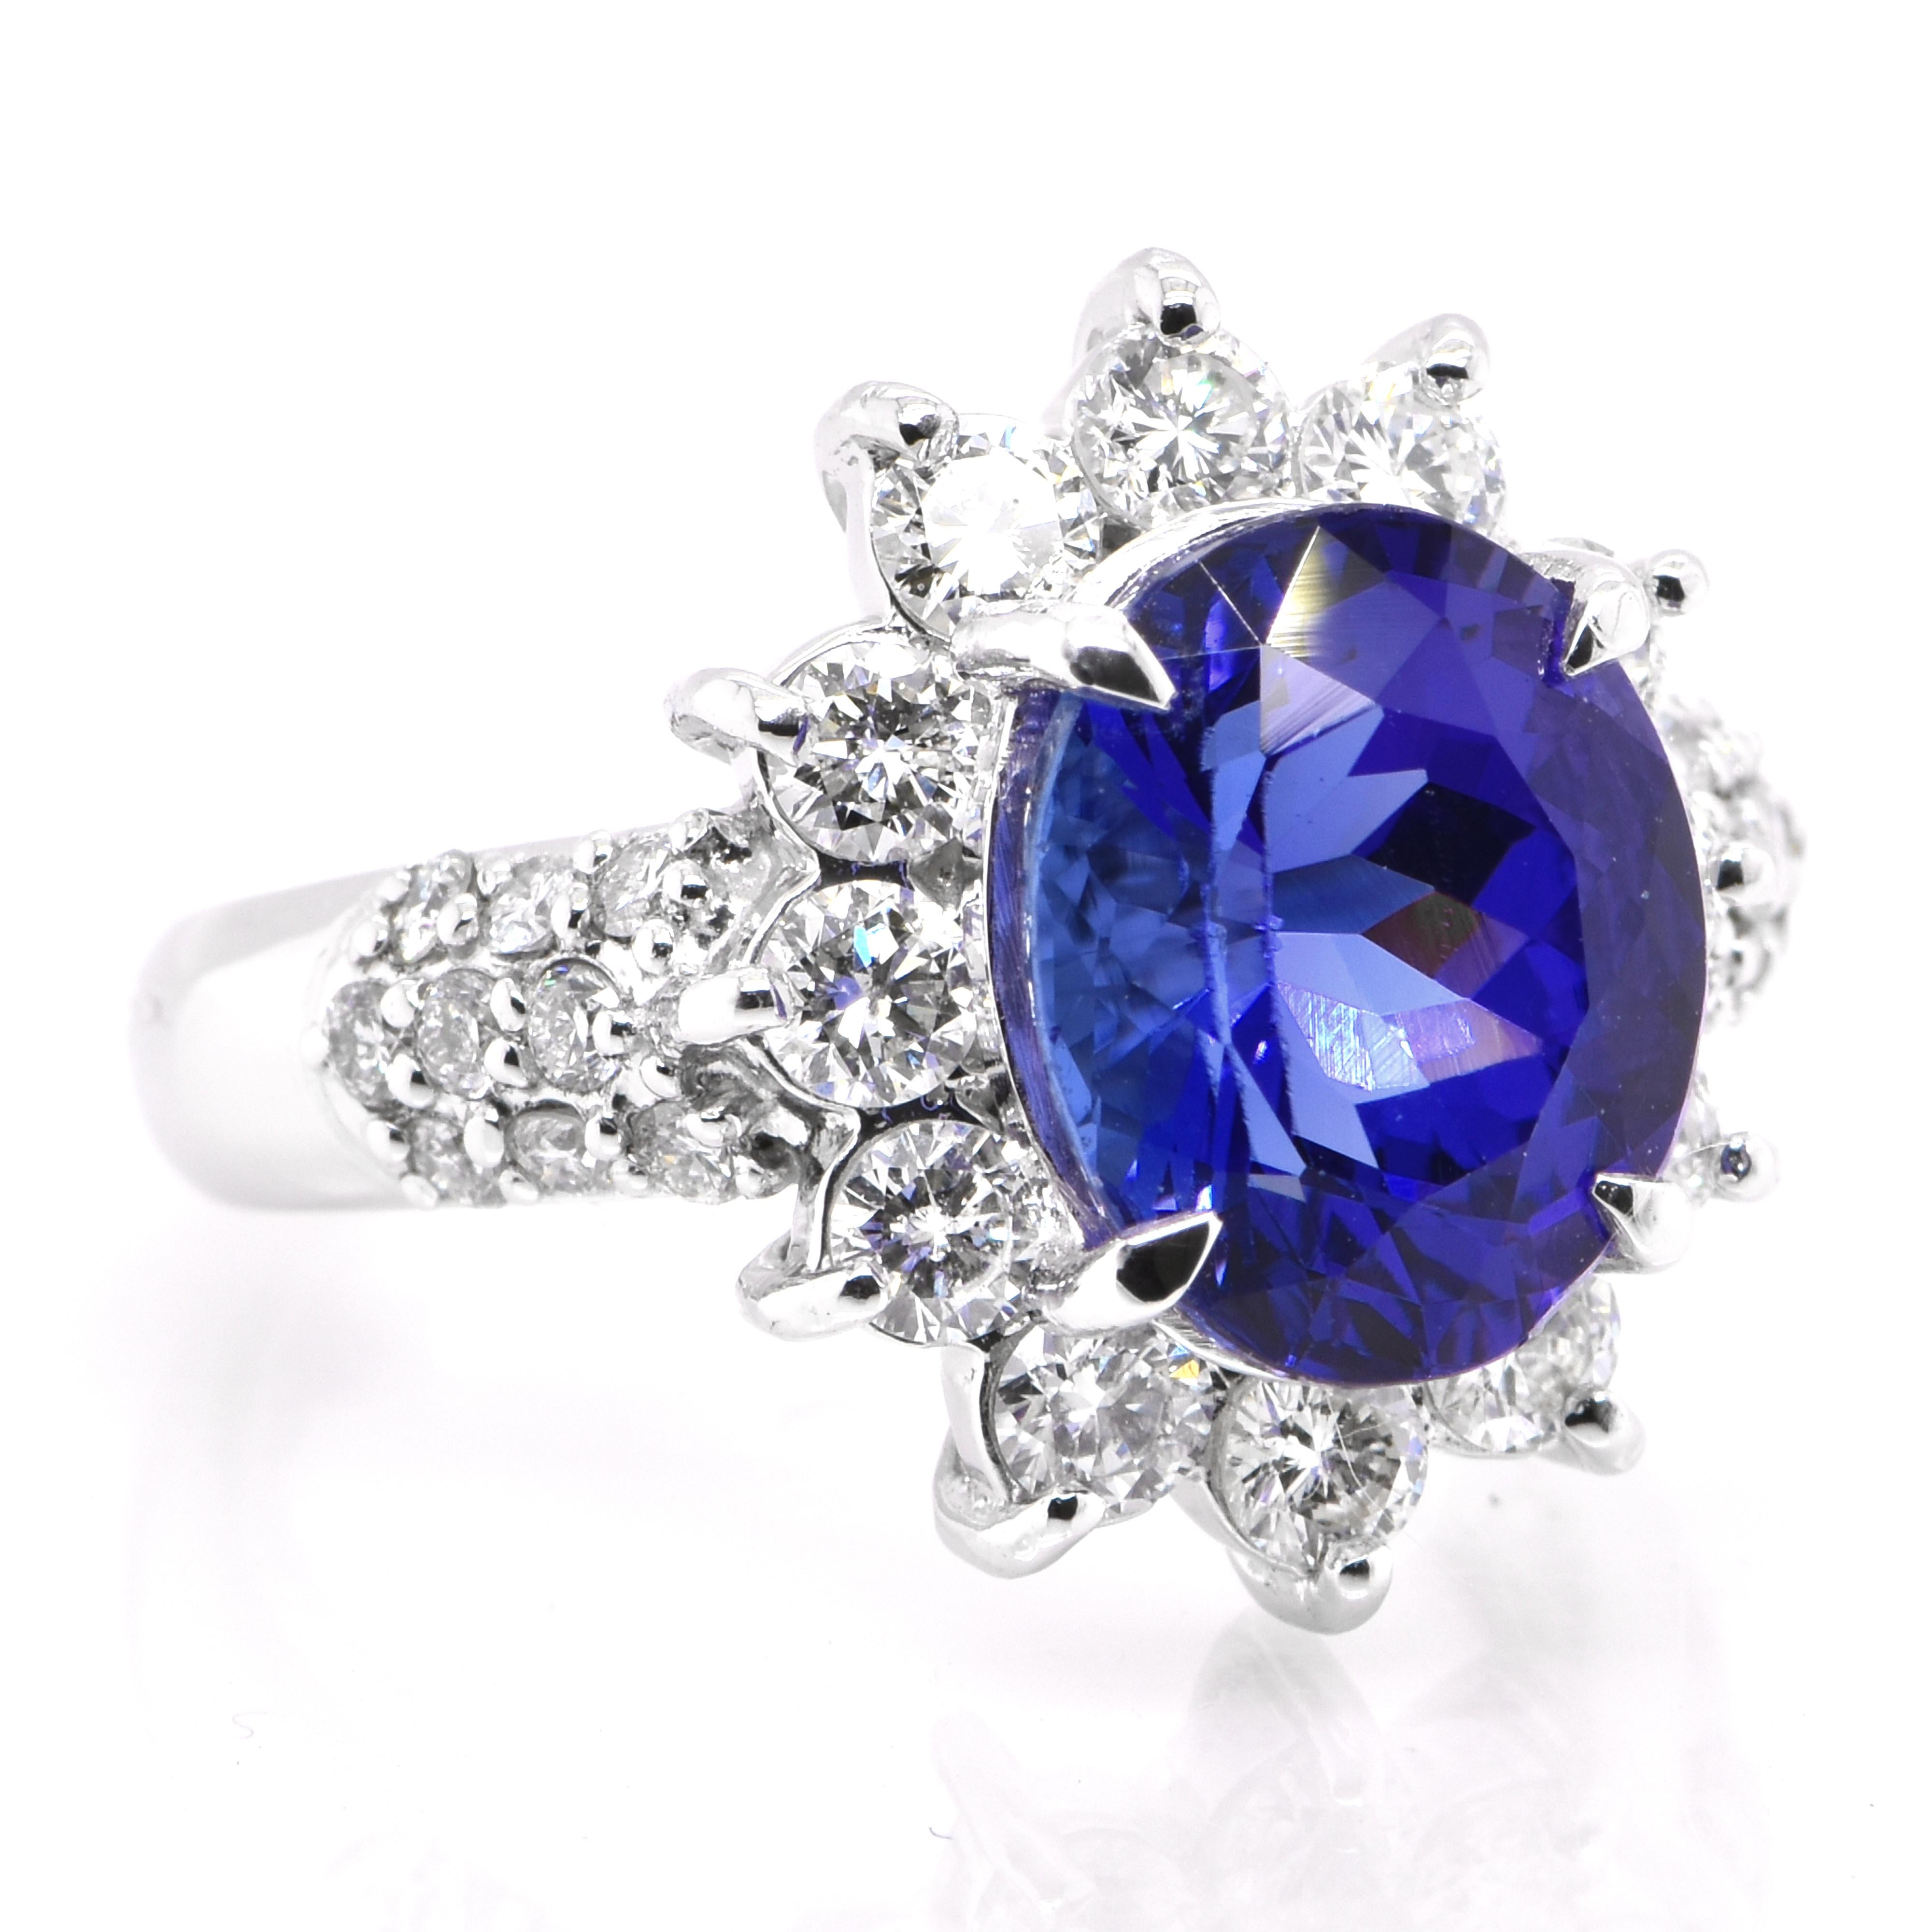 Modern 4.14 Carat Natural Oval-Cut Tanzanite and Diamond Cocktail Ring Set in Platinum For Sale